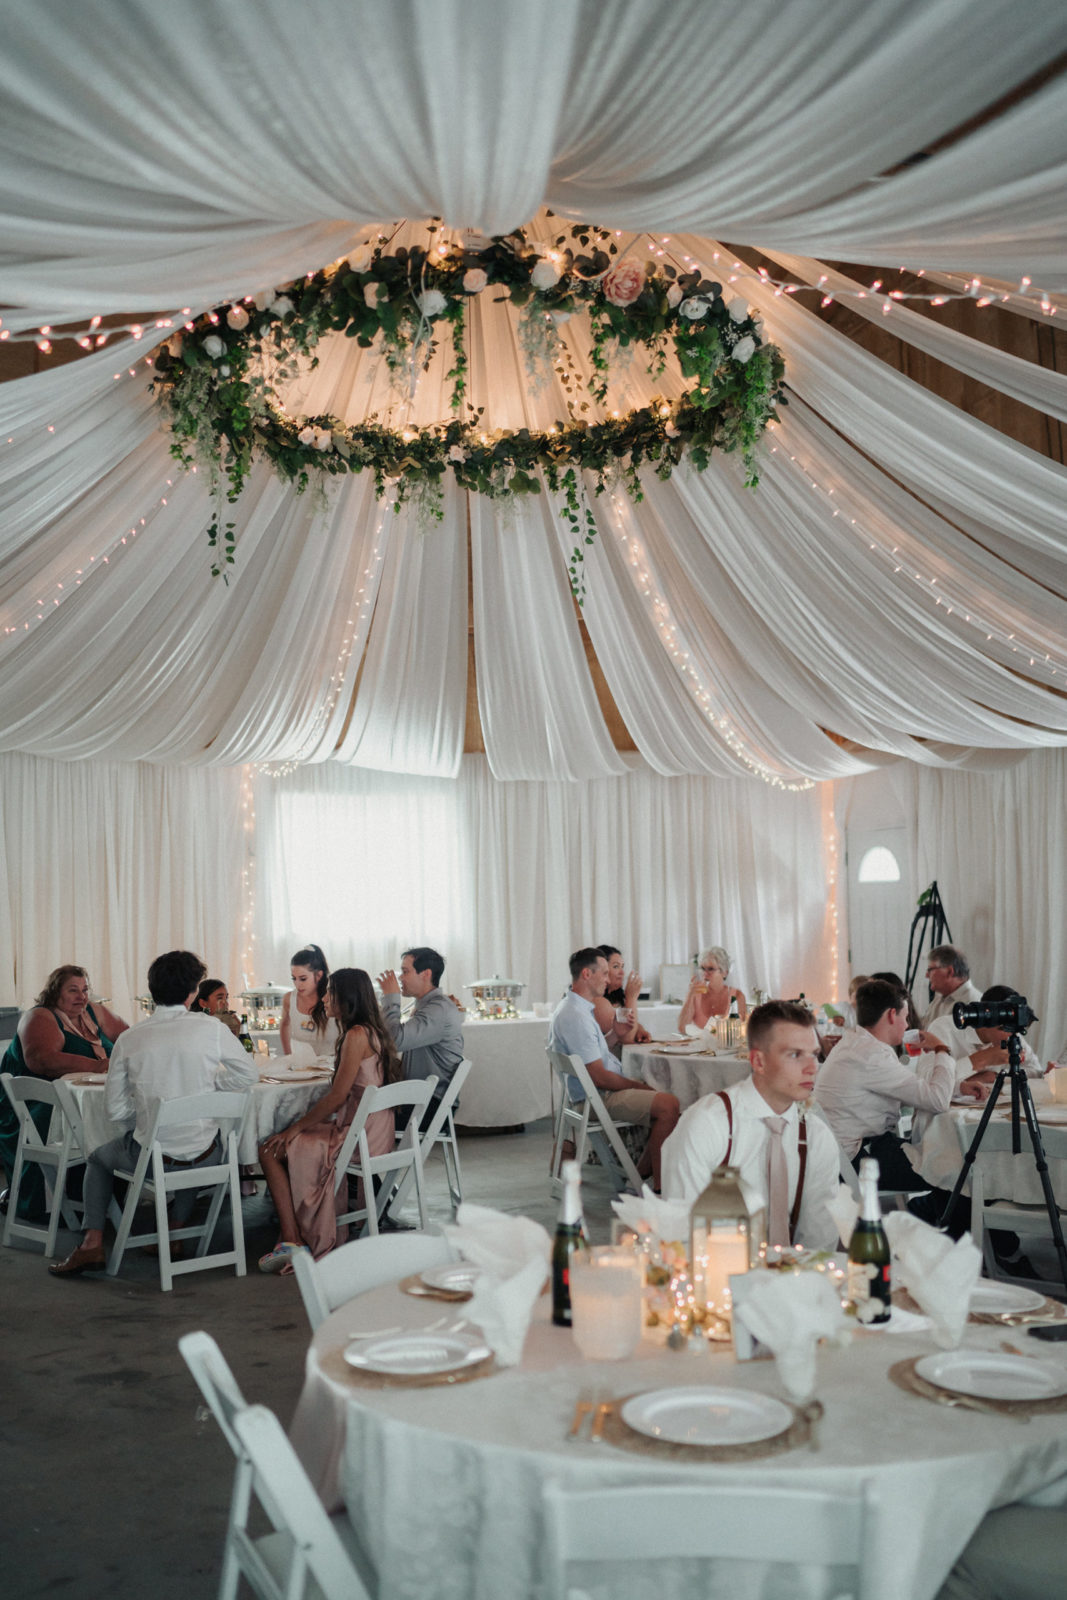 Wedding reception with greenery and white